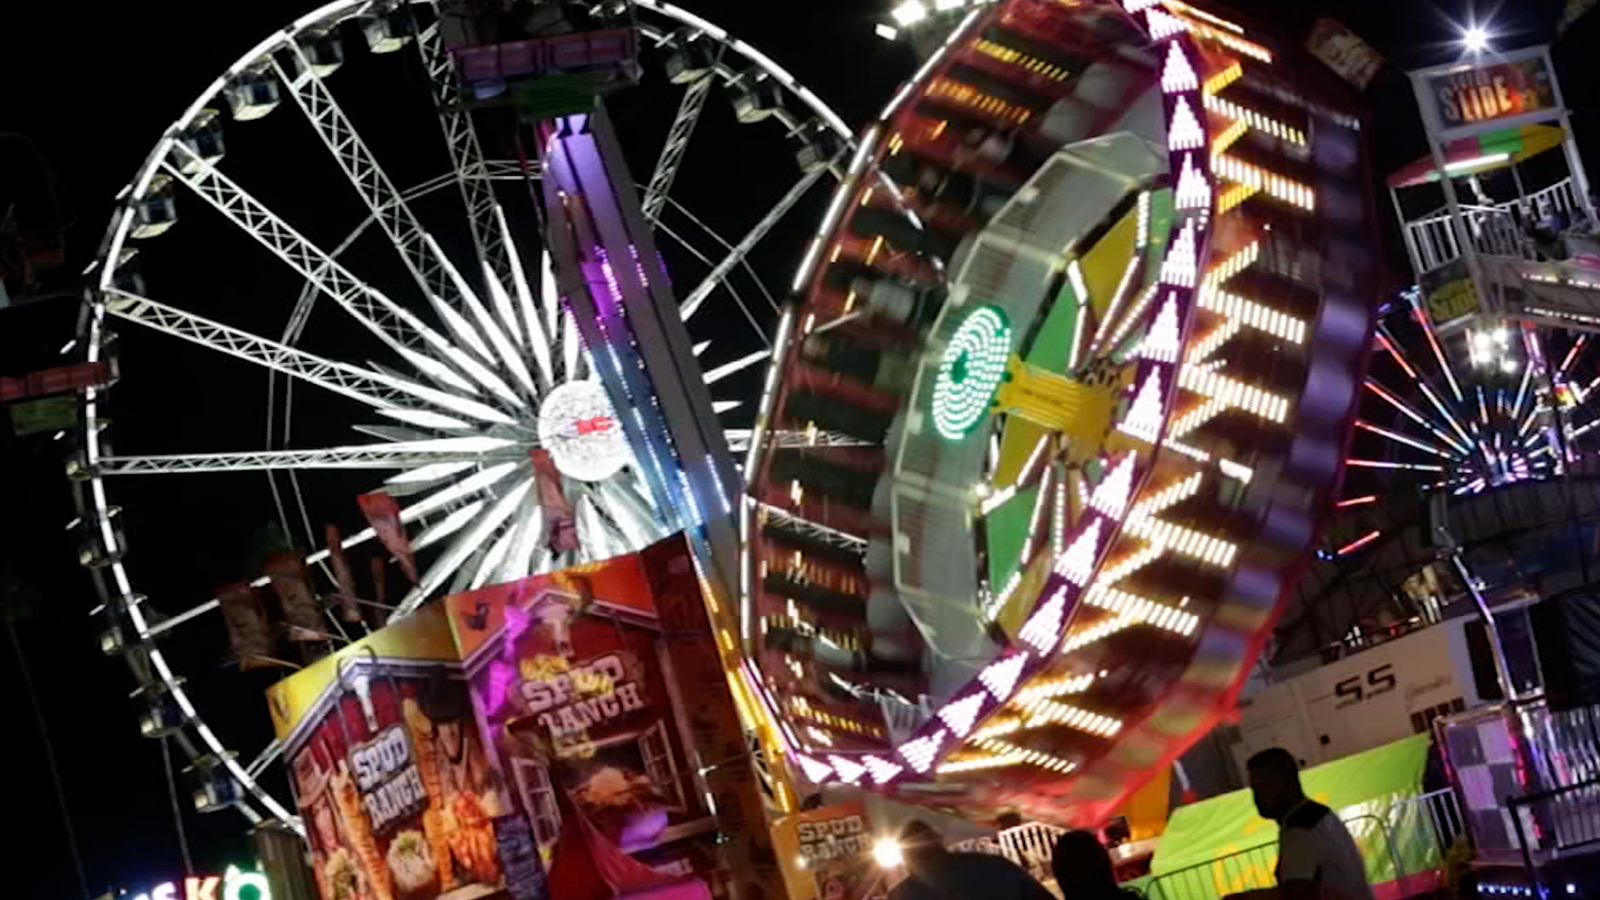 The Los Angeles County Fair returns to the Fairplex in Pomona with new